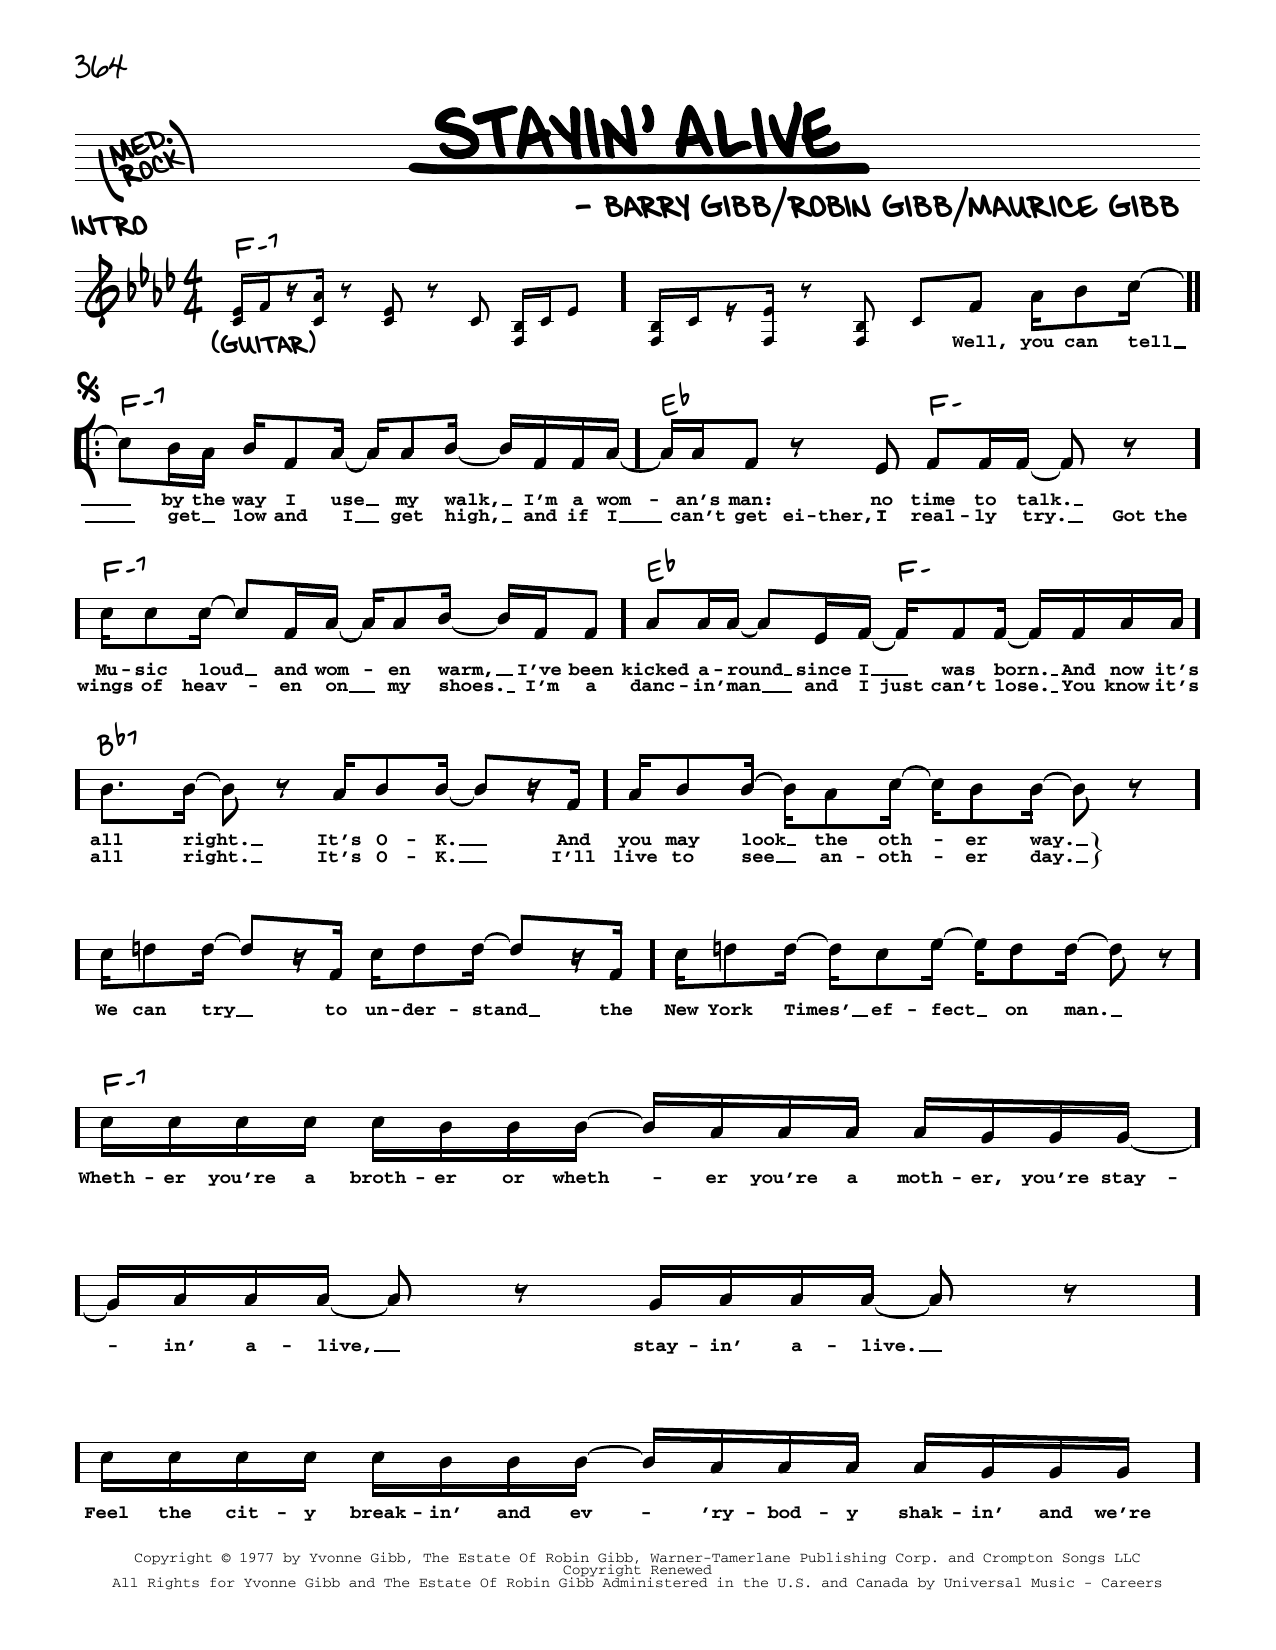 Download The Bee Gees Stayin' Alive Sheet Music